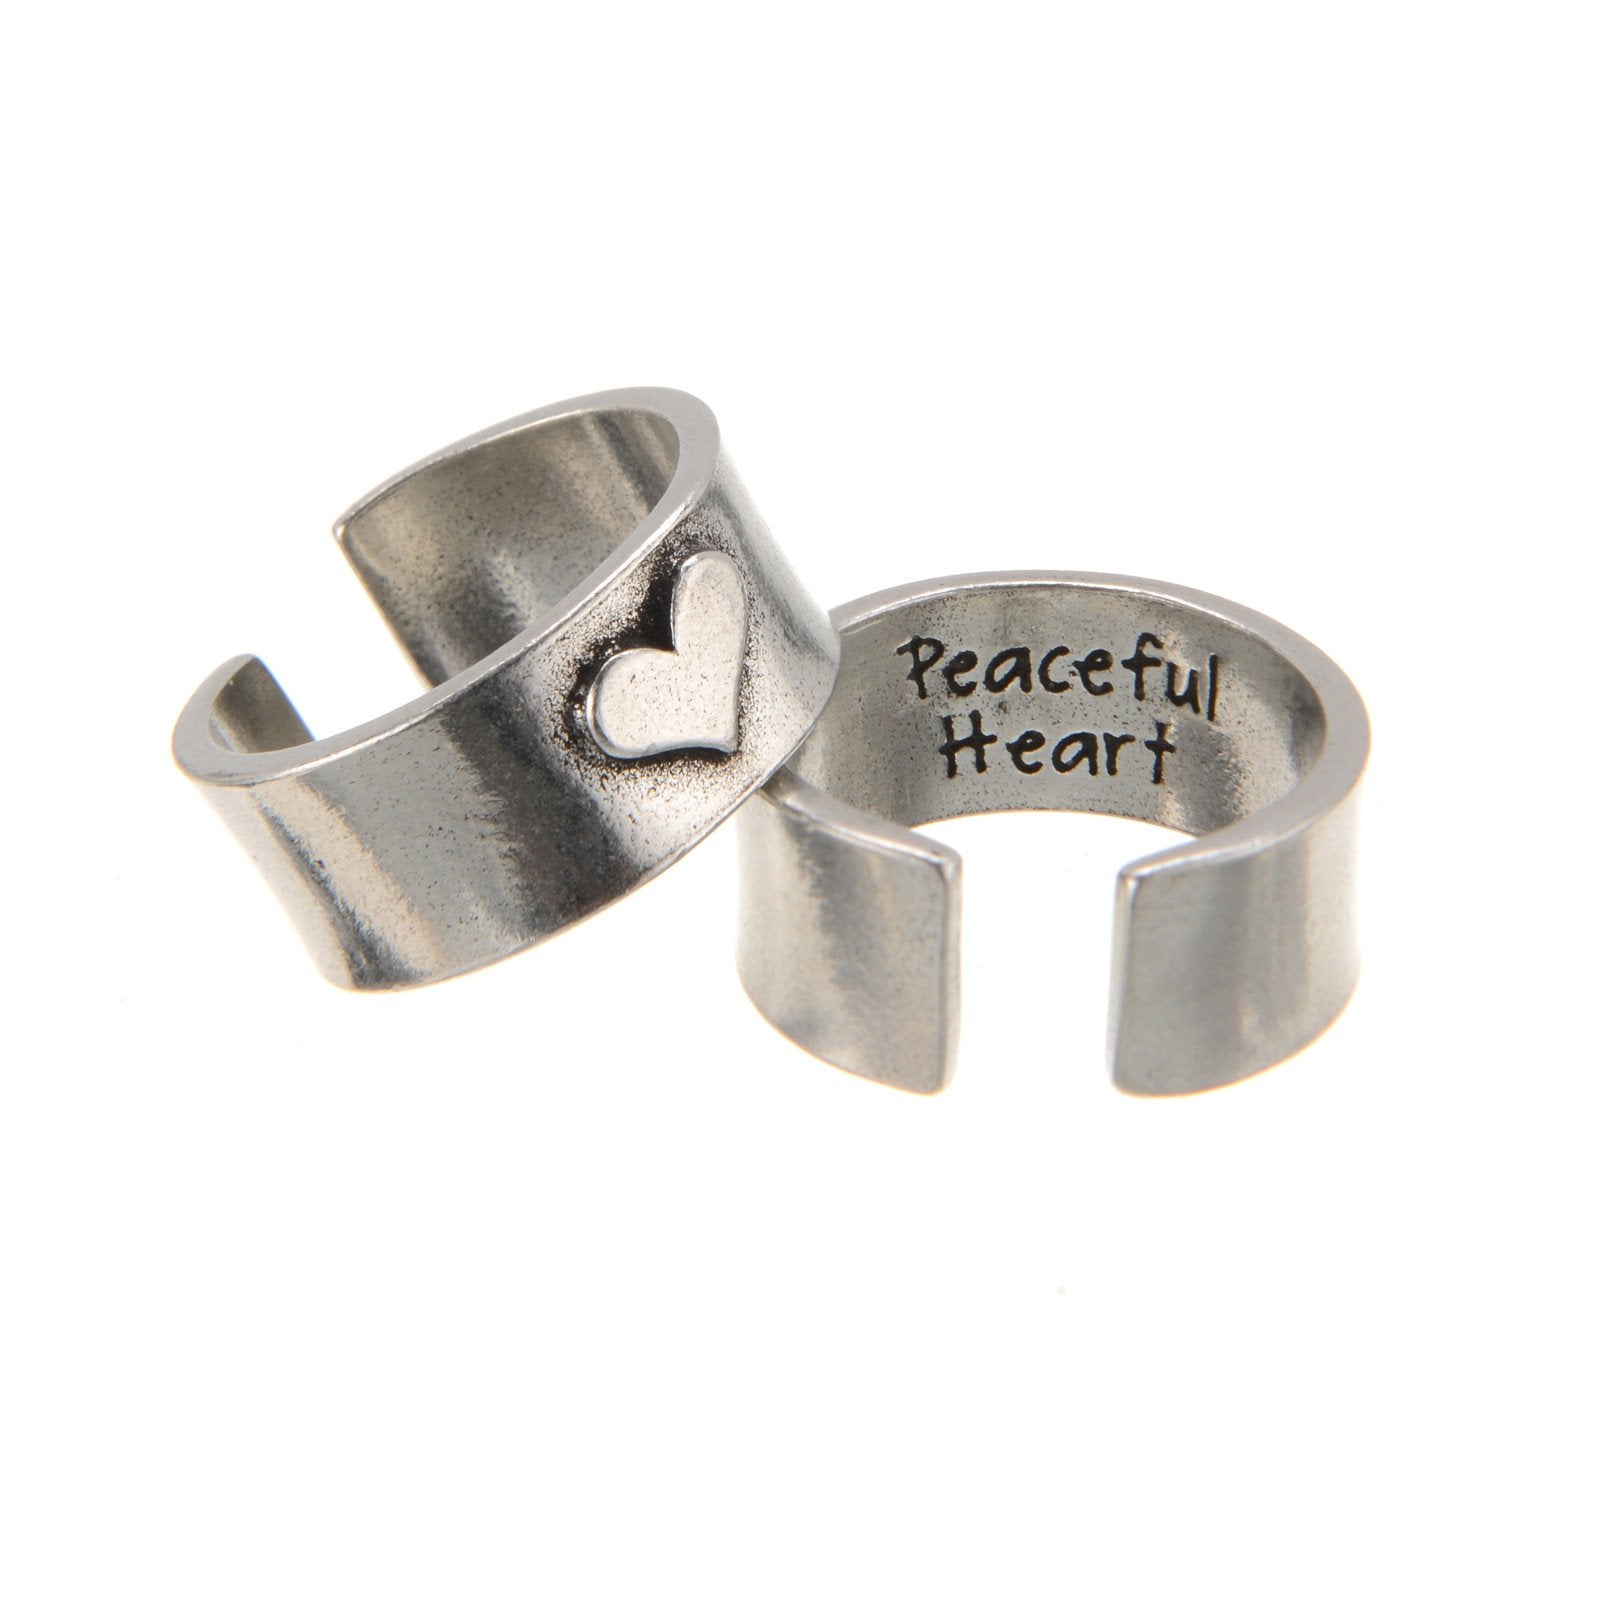 "Hearts of Gold" PEACEFUL HEART Ring